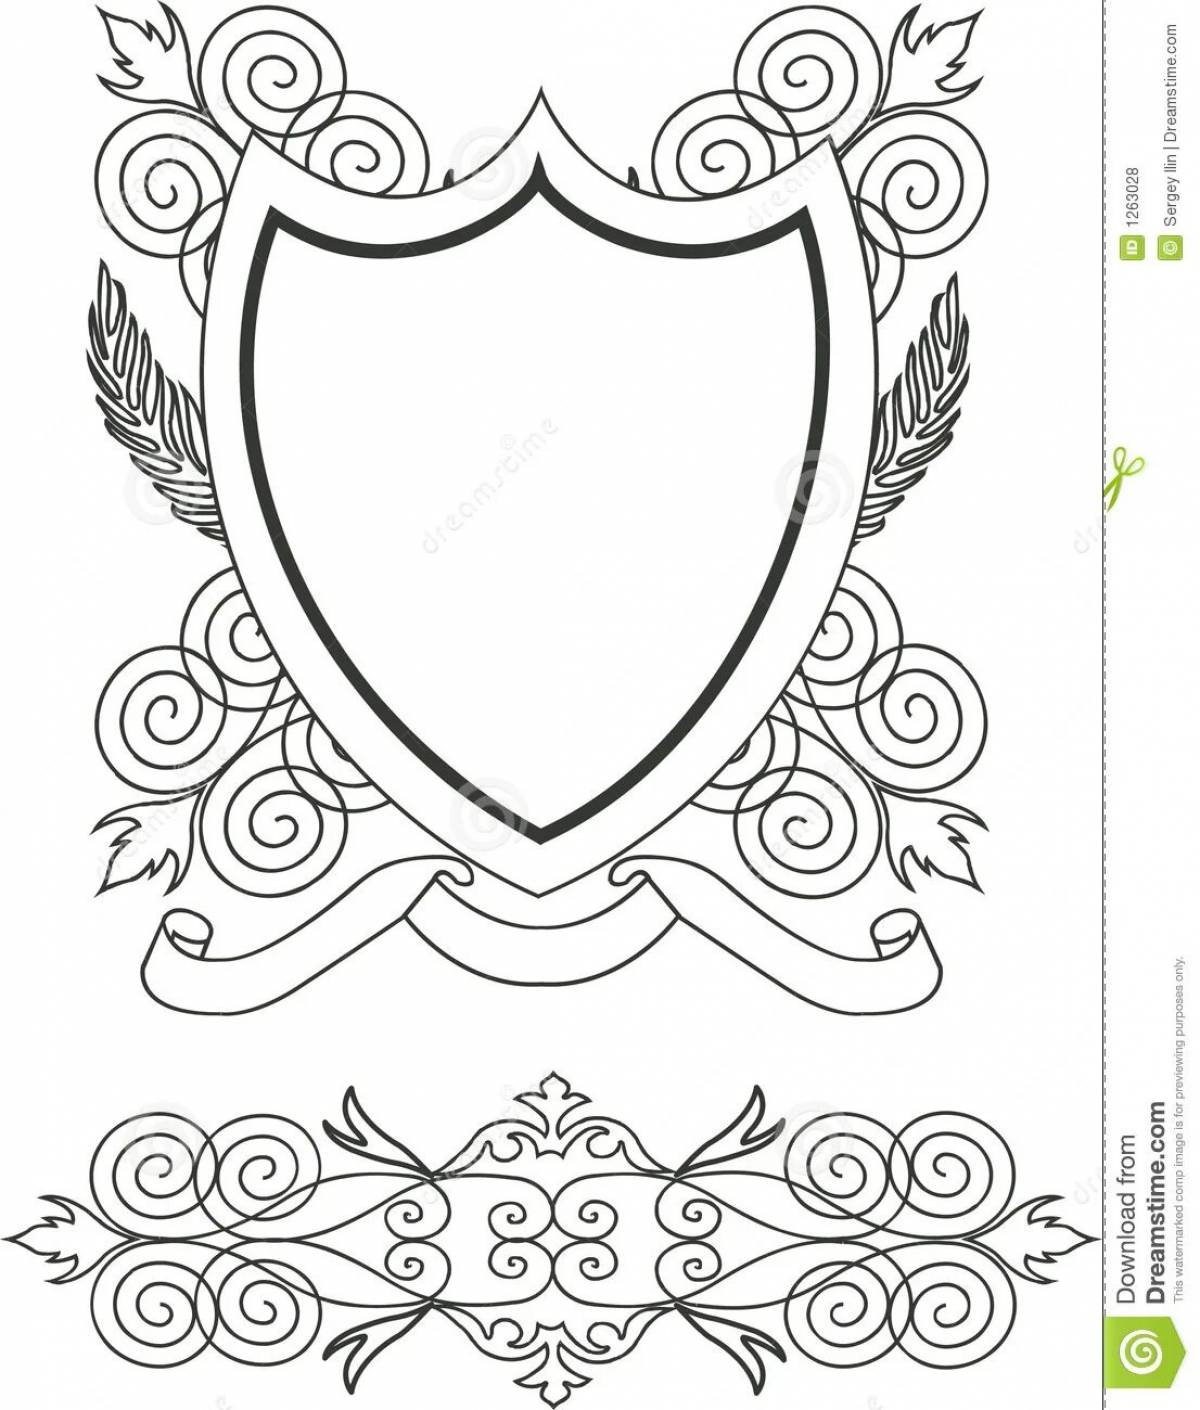 Family coat of arms #8